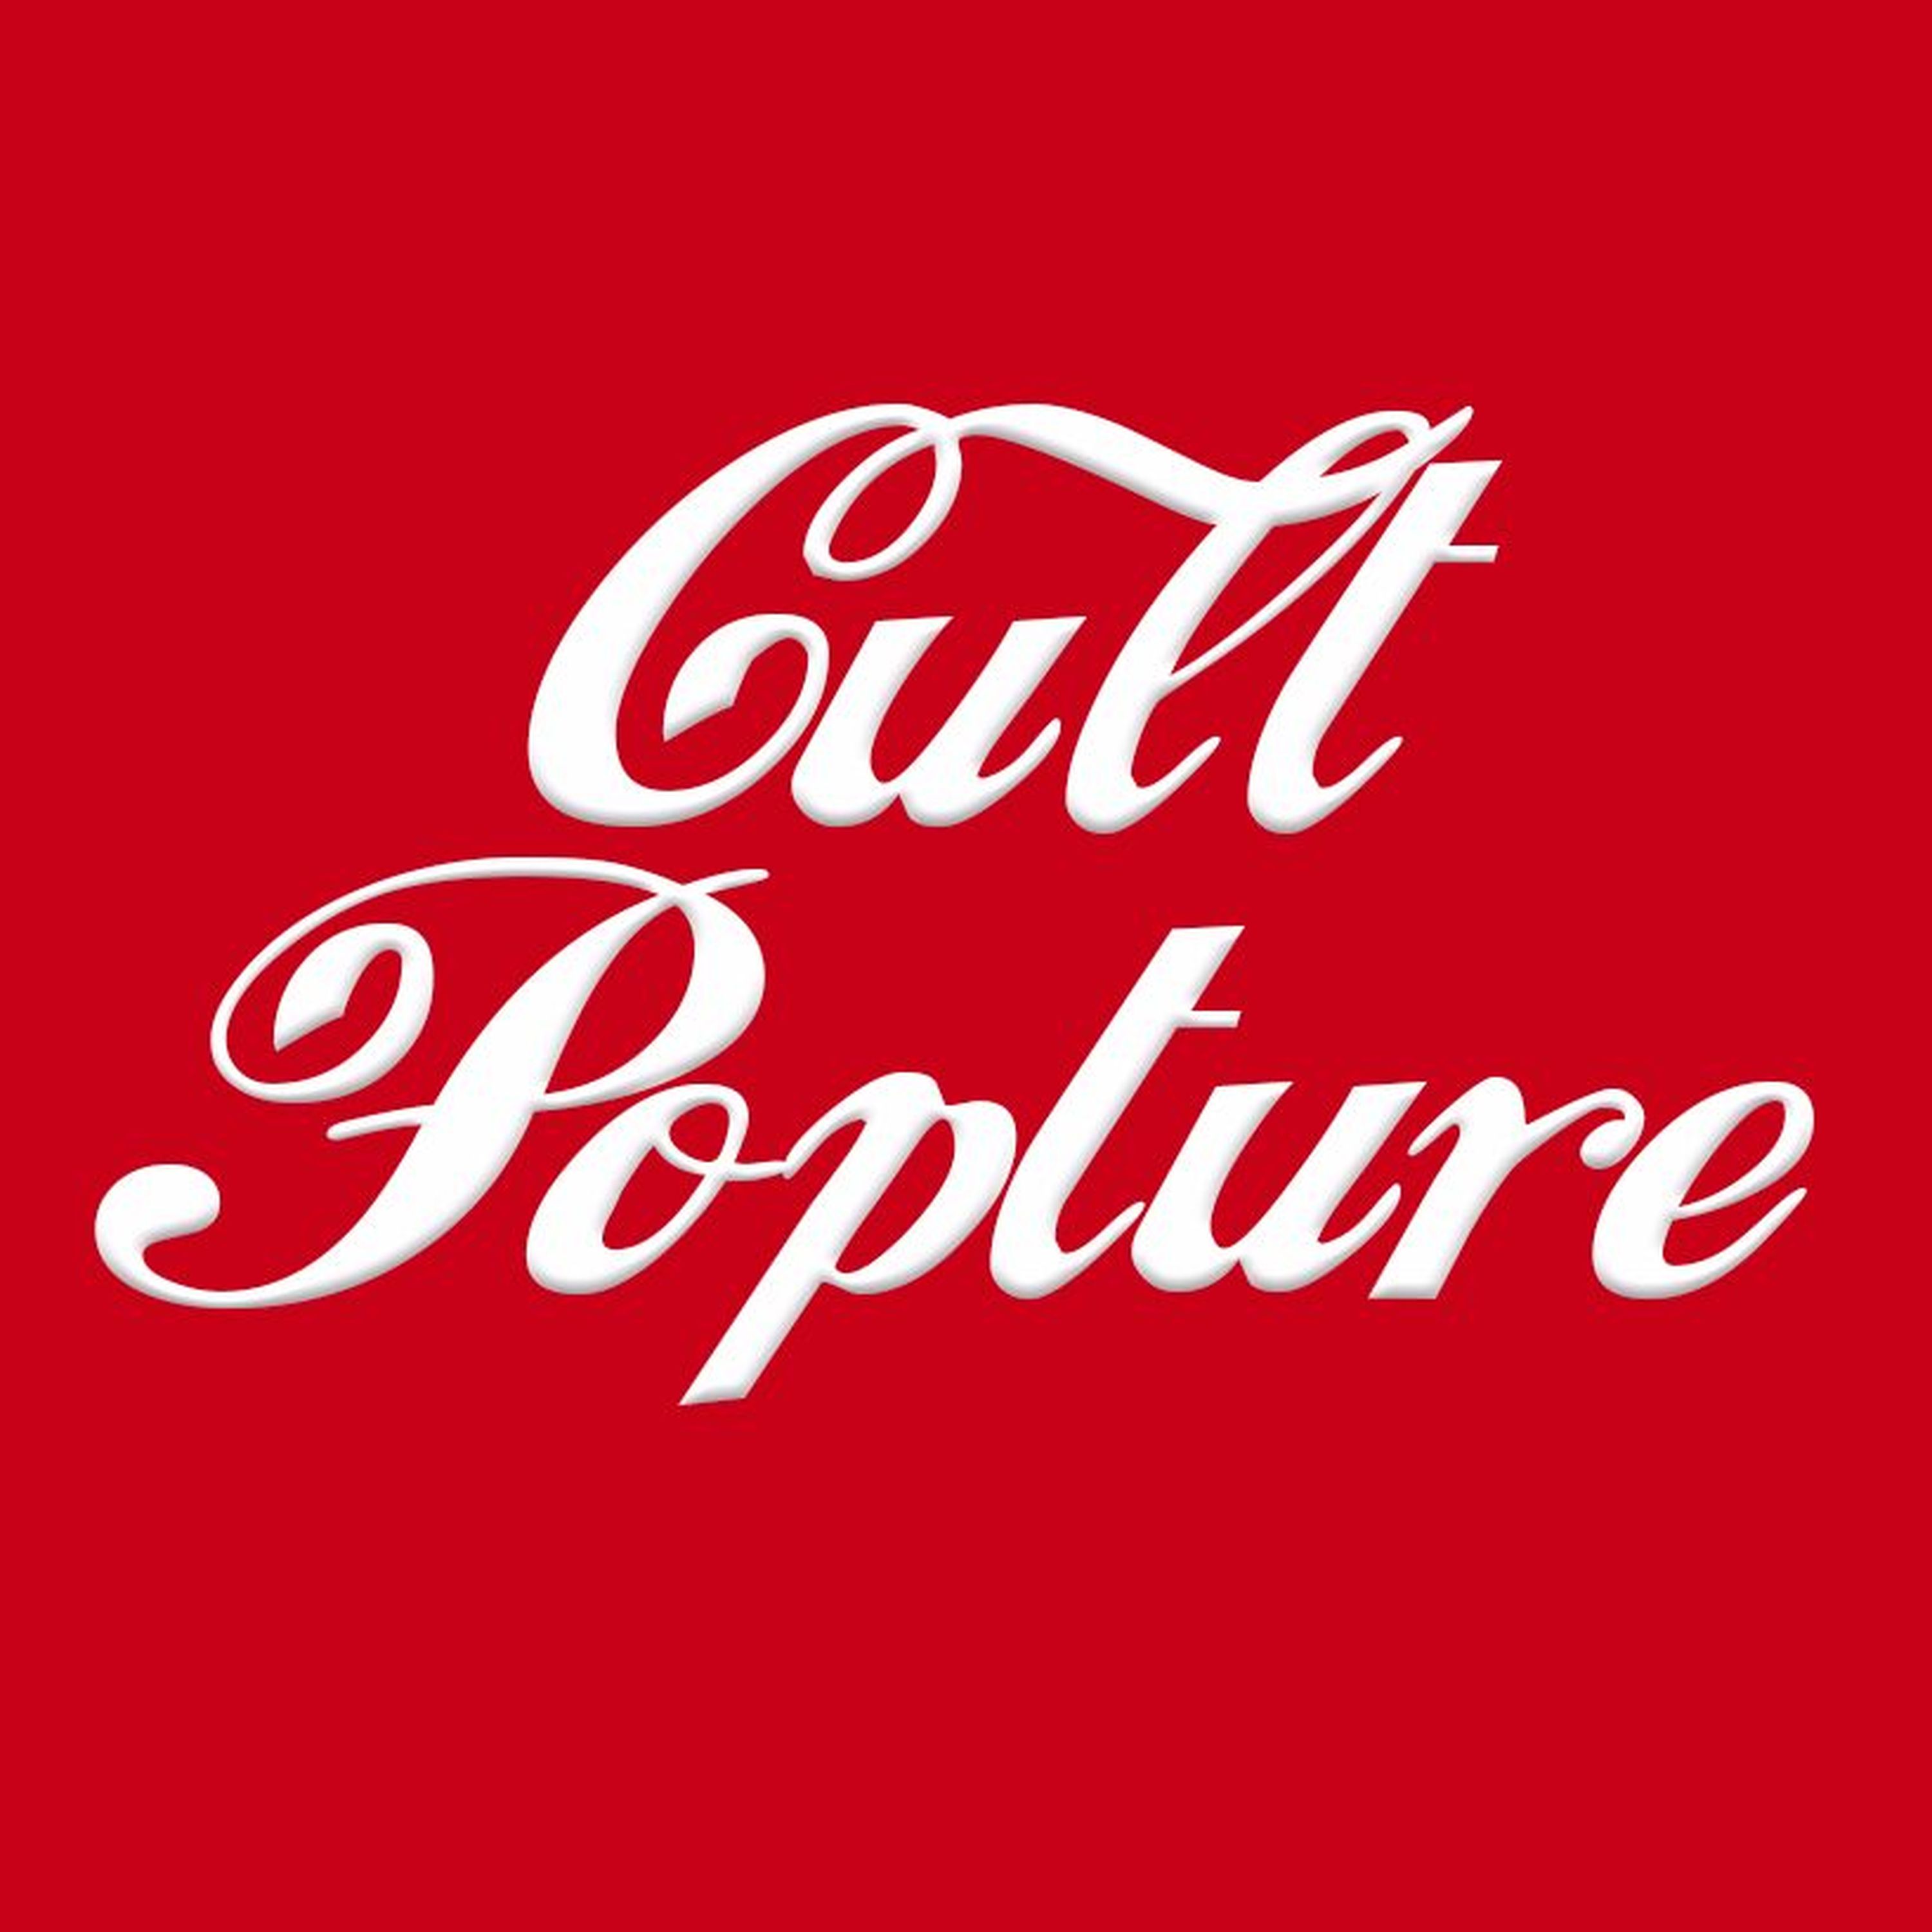 Marvel Actors and DC Actors (Who haven't been cast yet) | The Cult Popture Podcast